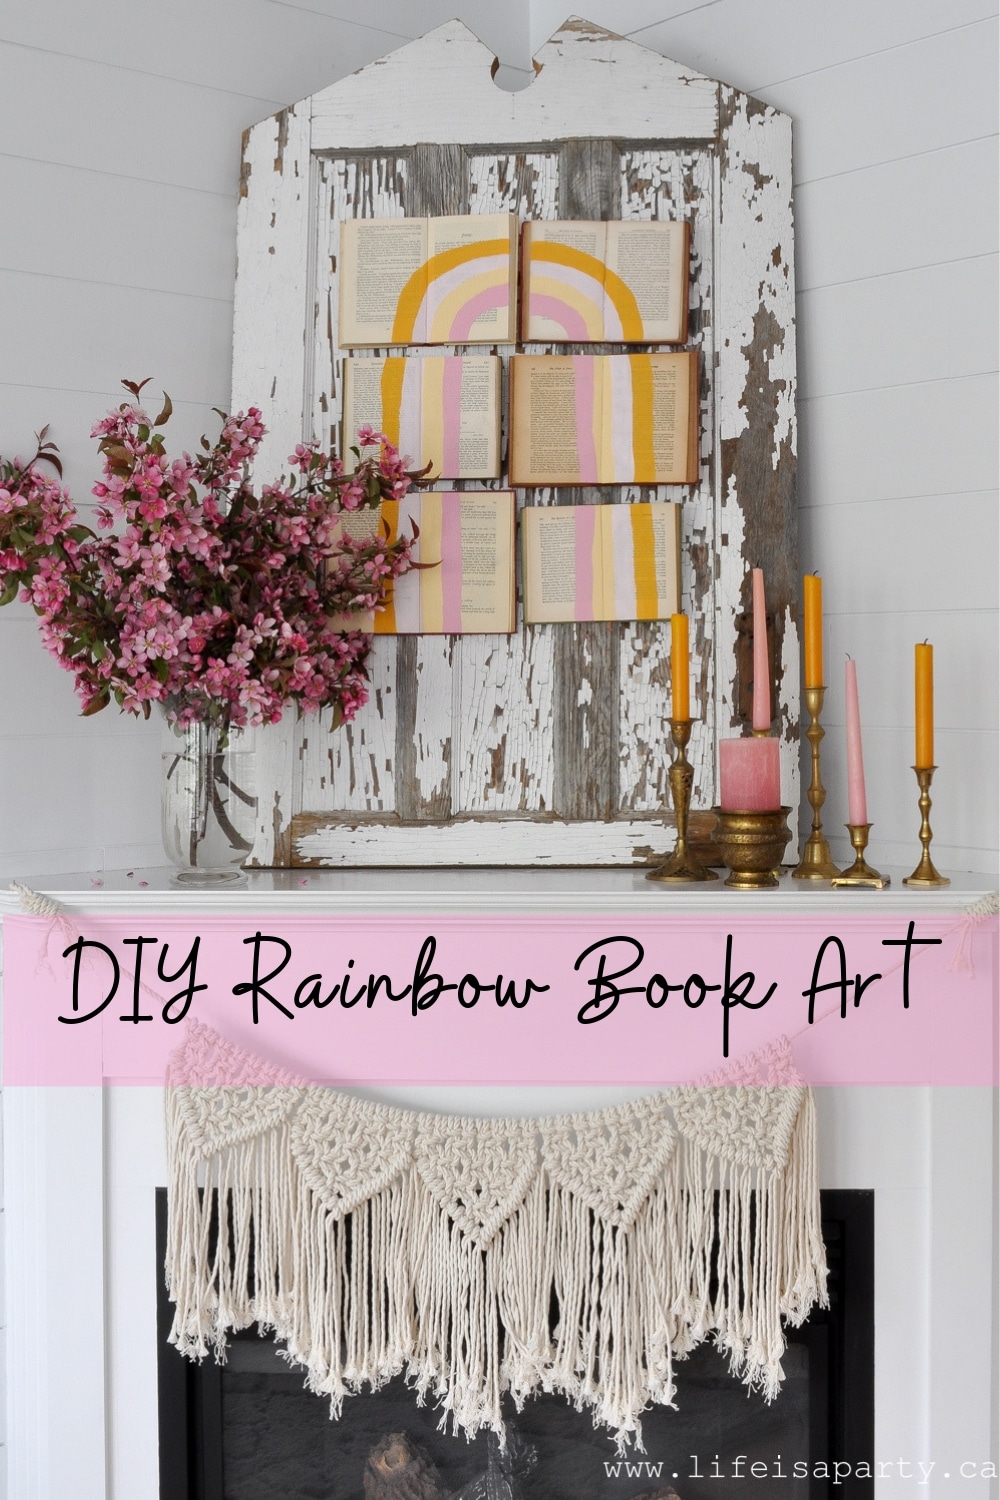 DIY Rainbow Book Art: Using old books as a canvas this DIY rainbow art in mustard yellow and pink is fun to make and inexpensive.